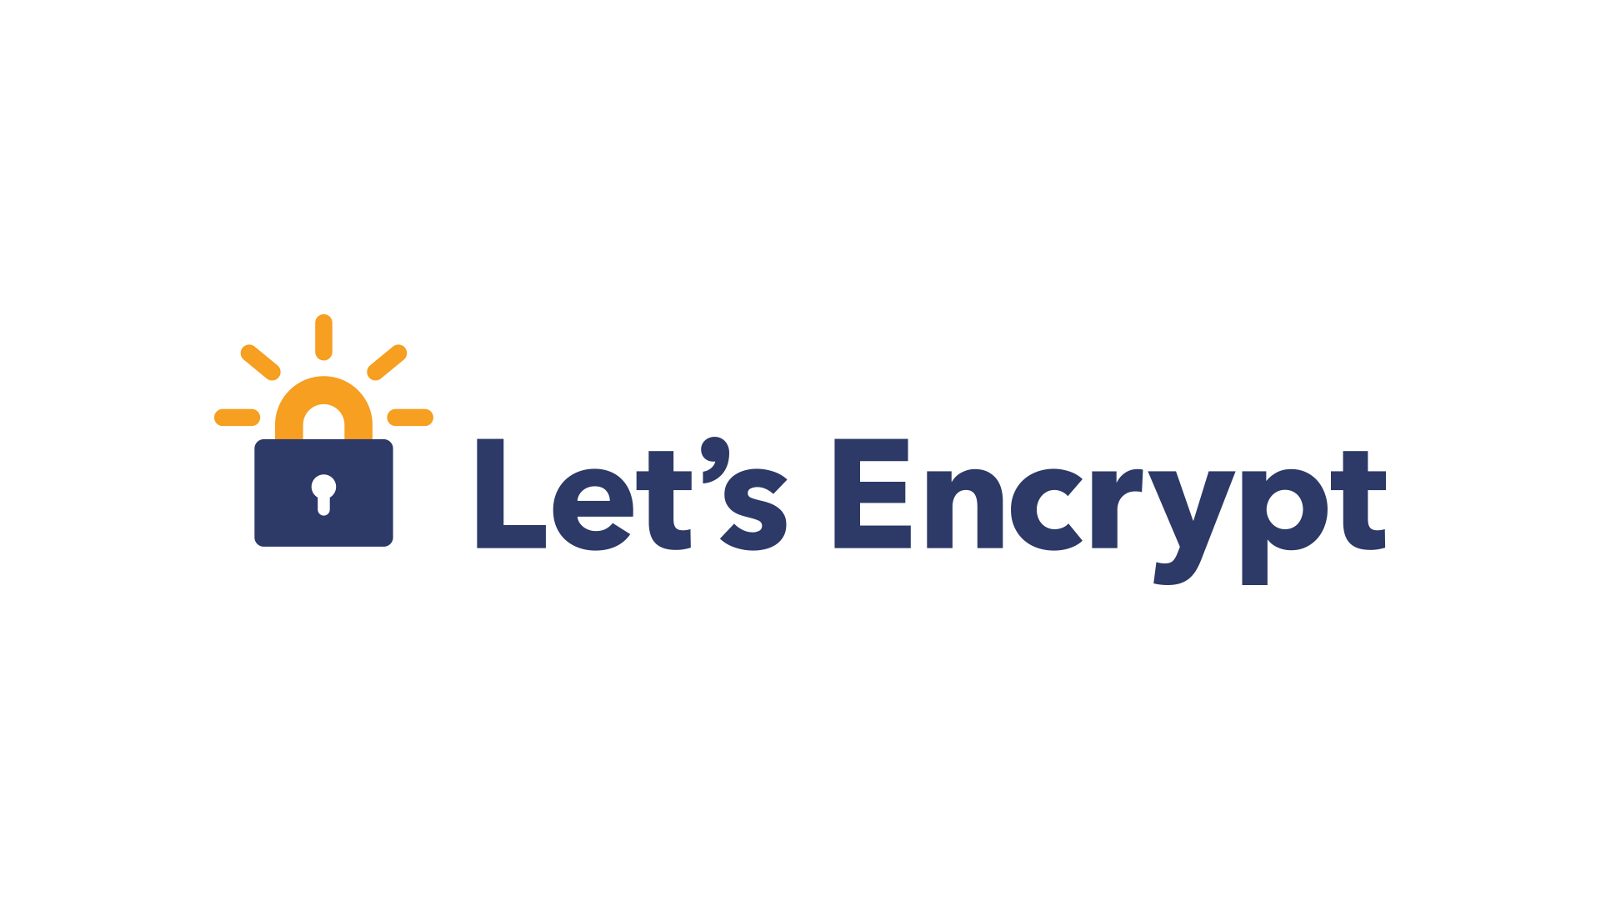 How to get a wildcard SSL certificate with letsencrypt and cloudflare on Linux server (Centos/Debian/Ubuntu)